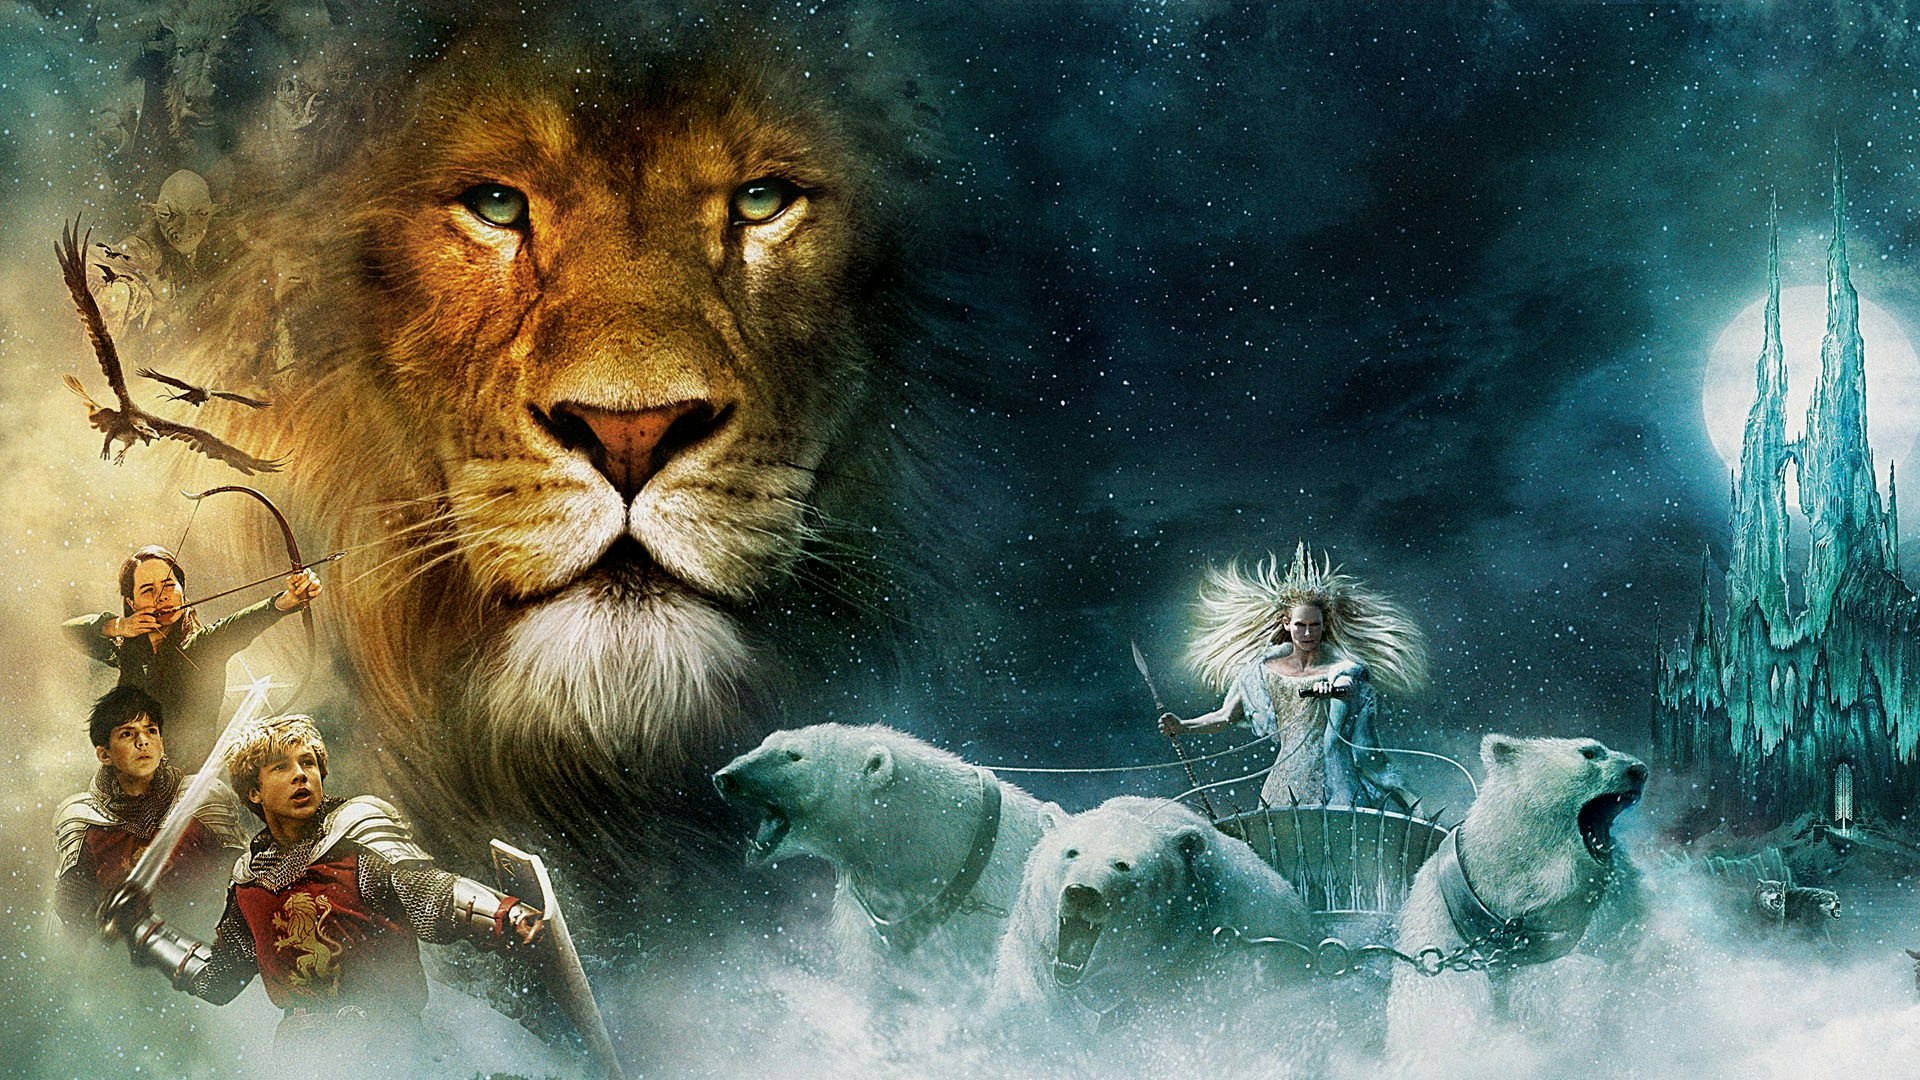 Aslan in The Chronicles of Narnia Looks So Much Better Than the